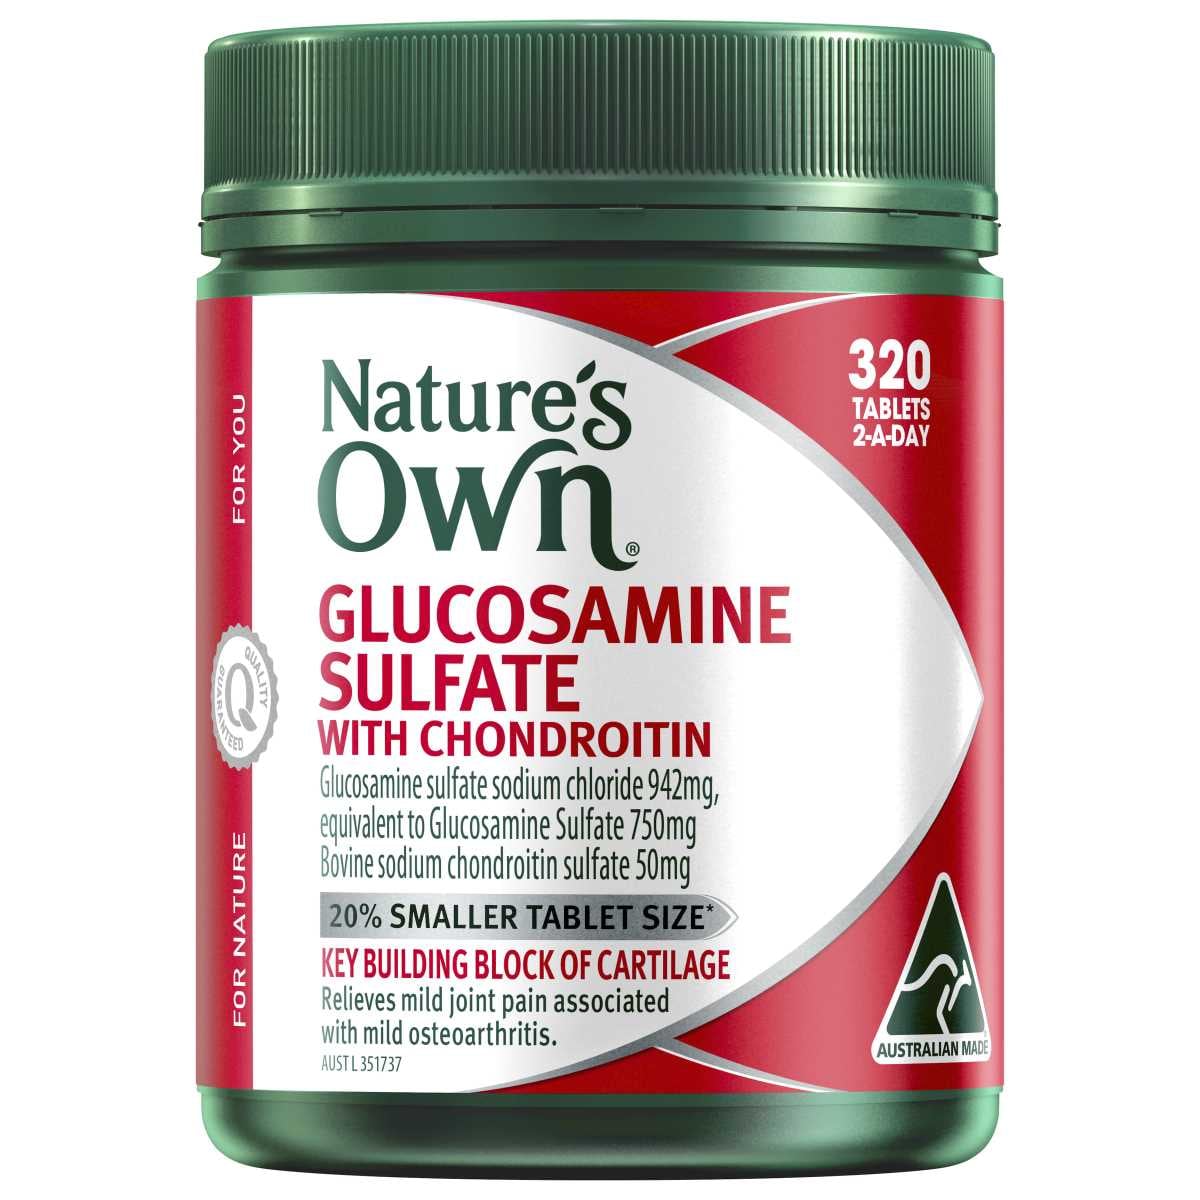 Natures Own Glucosamine Sulfate with Chondroitin 320 Tablets